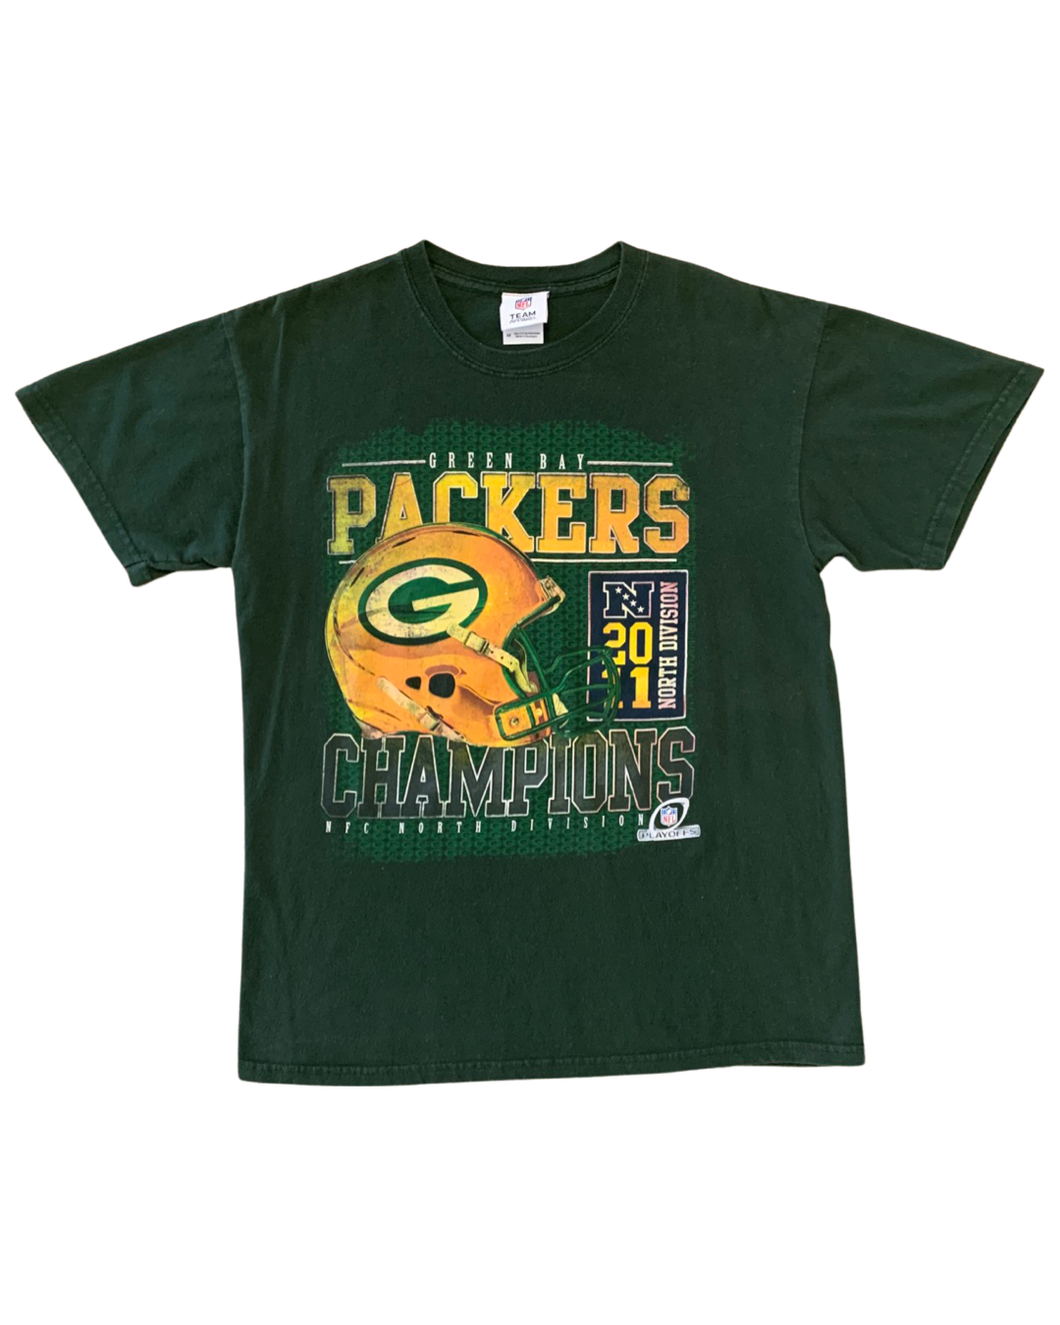 NFL Size M (UNISEX) Vintage 2011 Green Bay Packers Champions T-Shirt  JUL5921